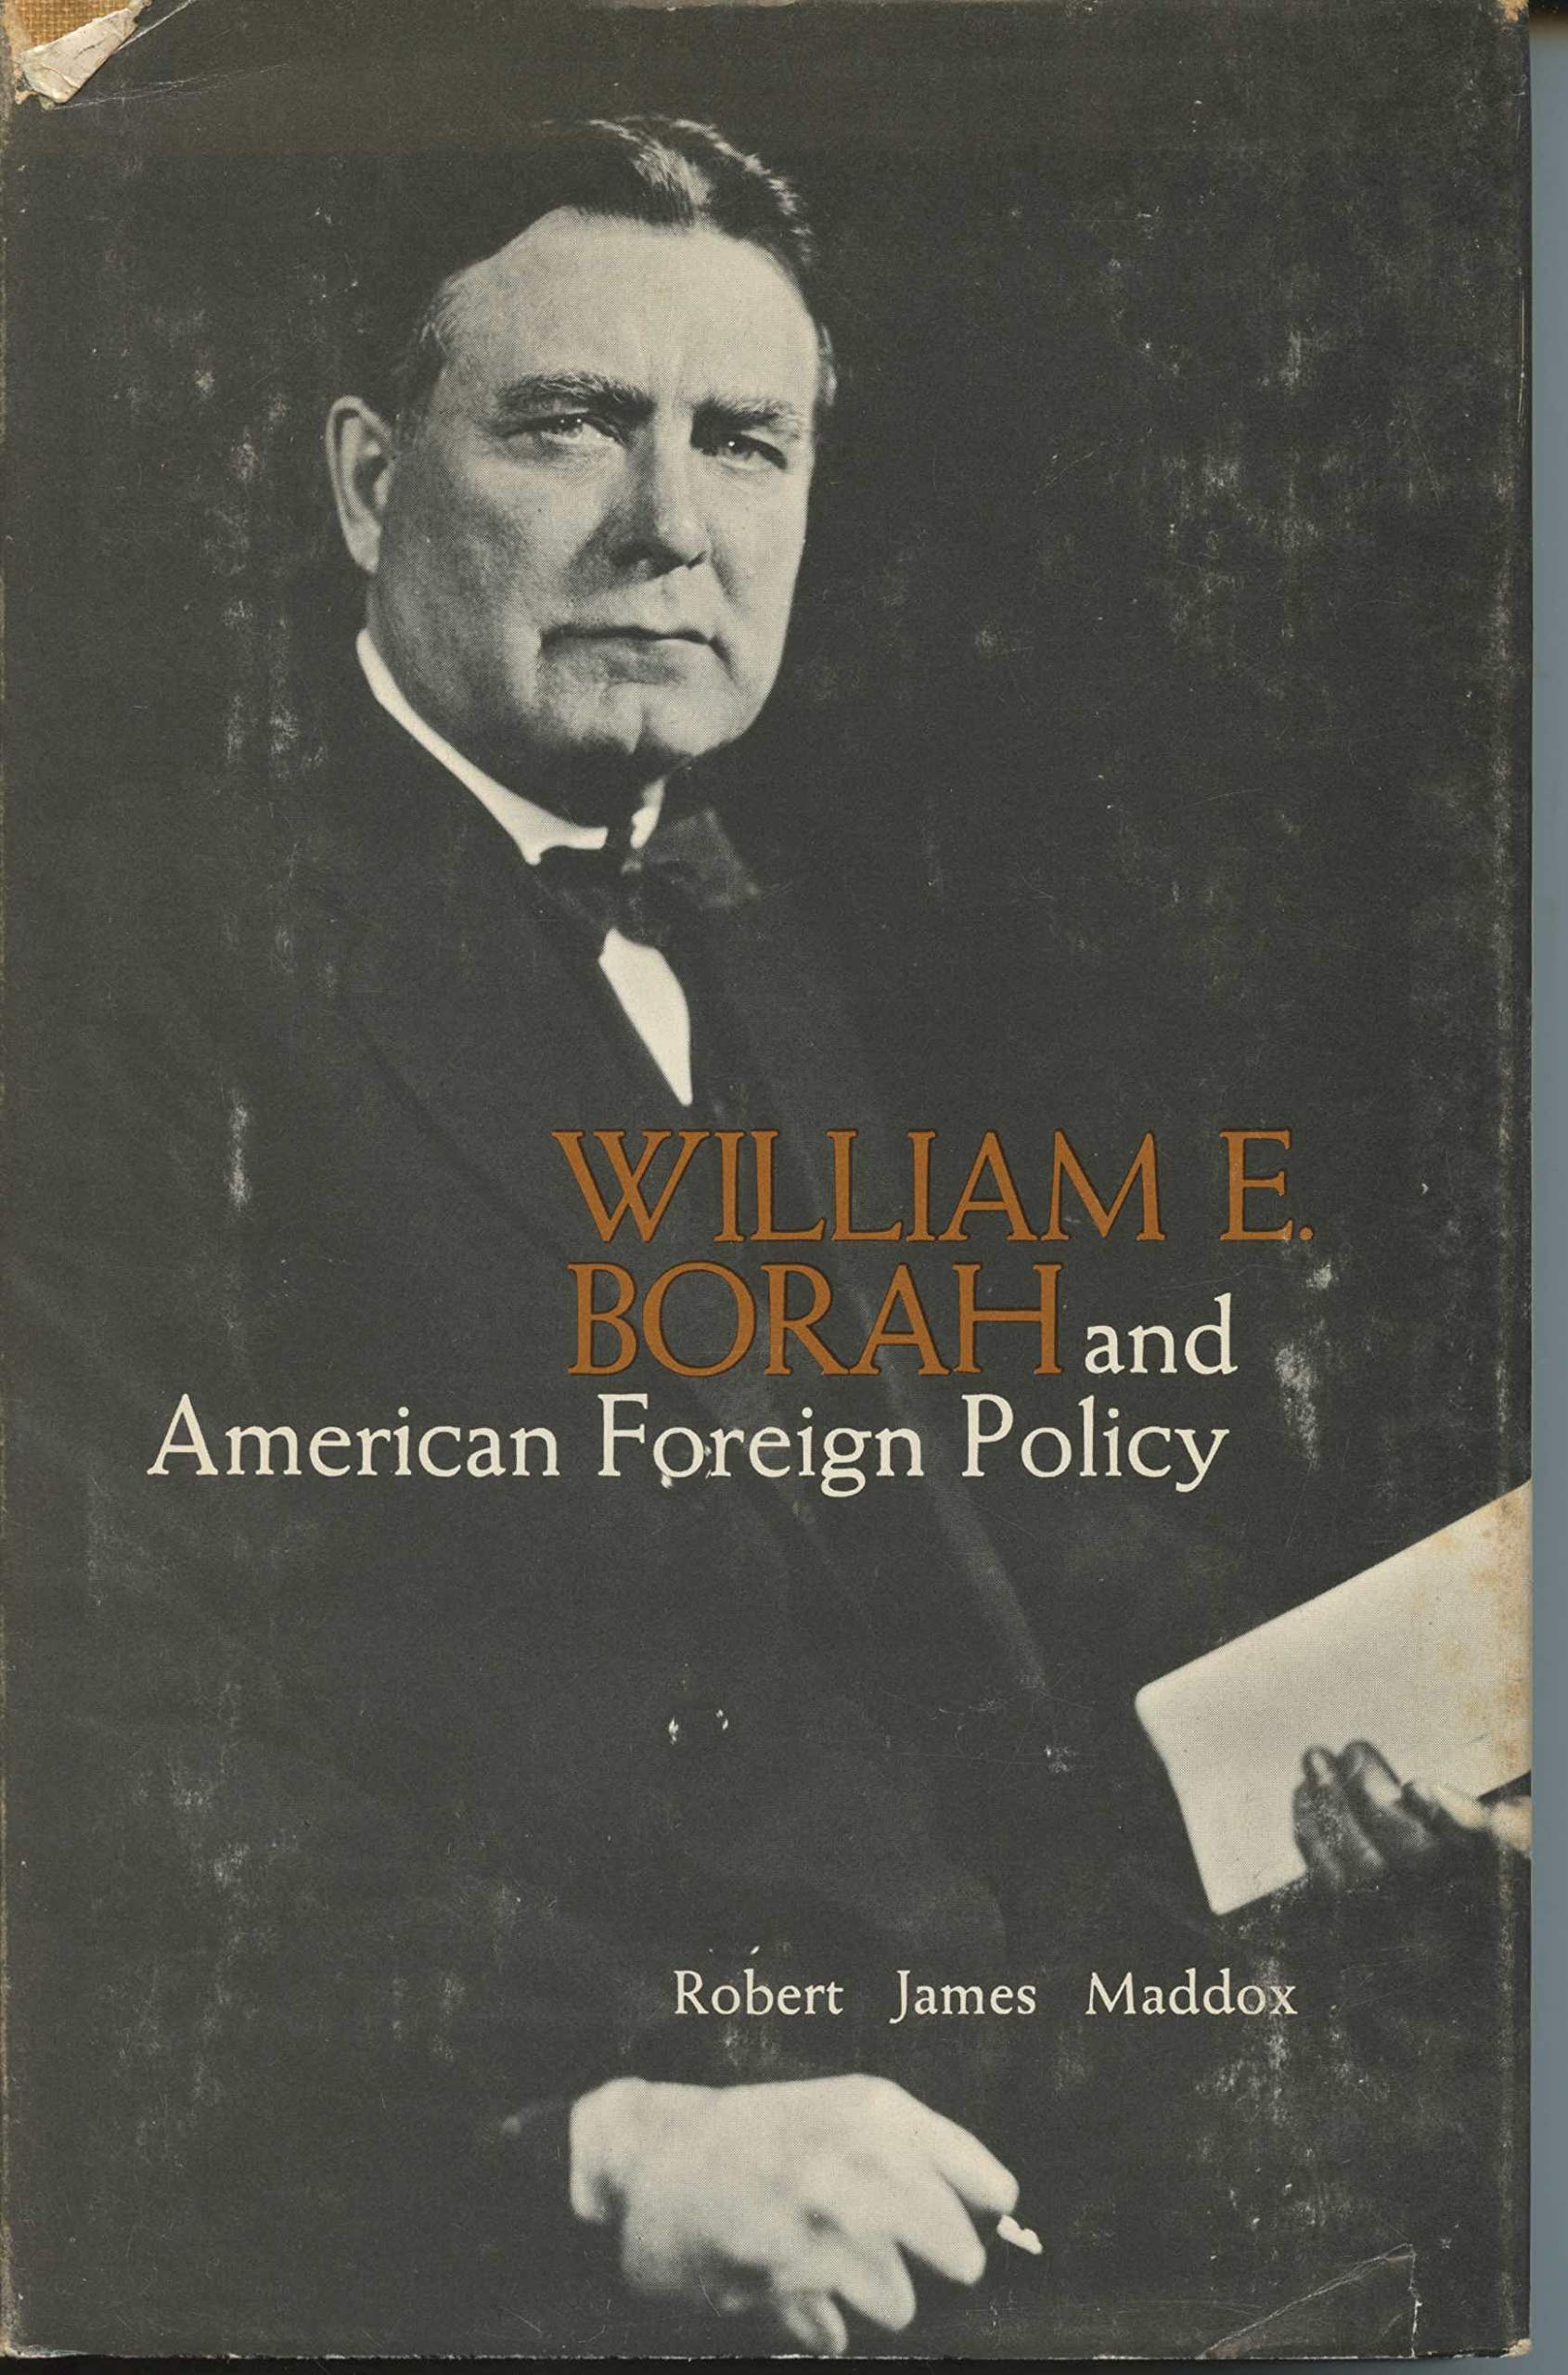 William E. Borah and American foreign policy (book cover)